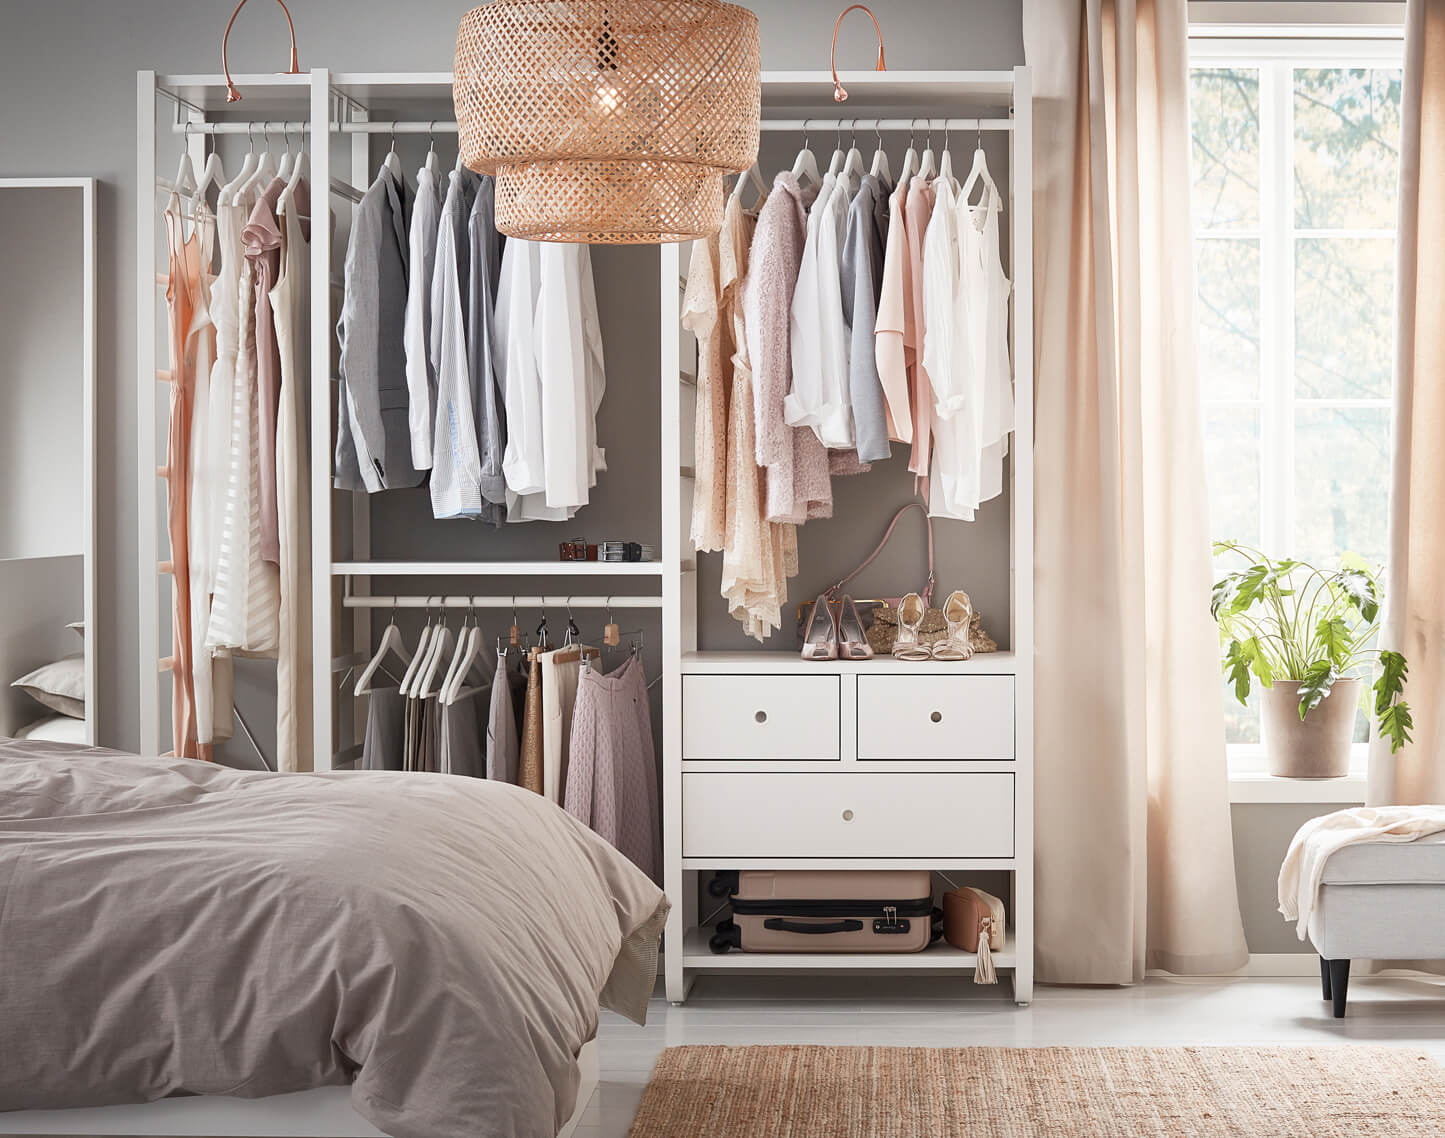 10. Tidy up the closets